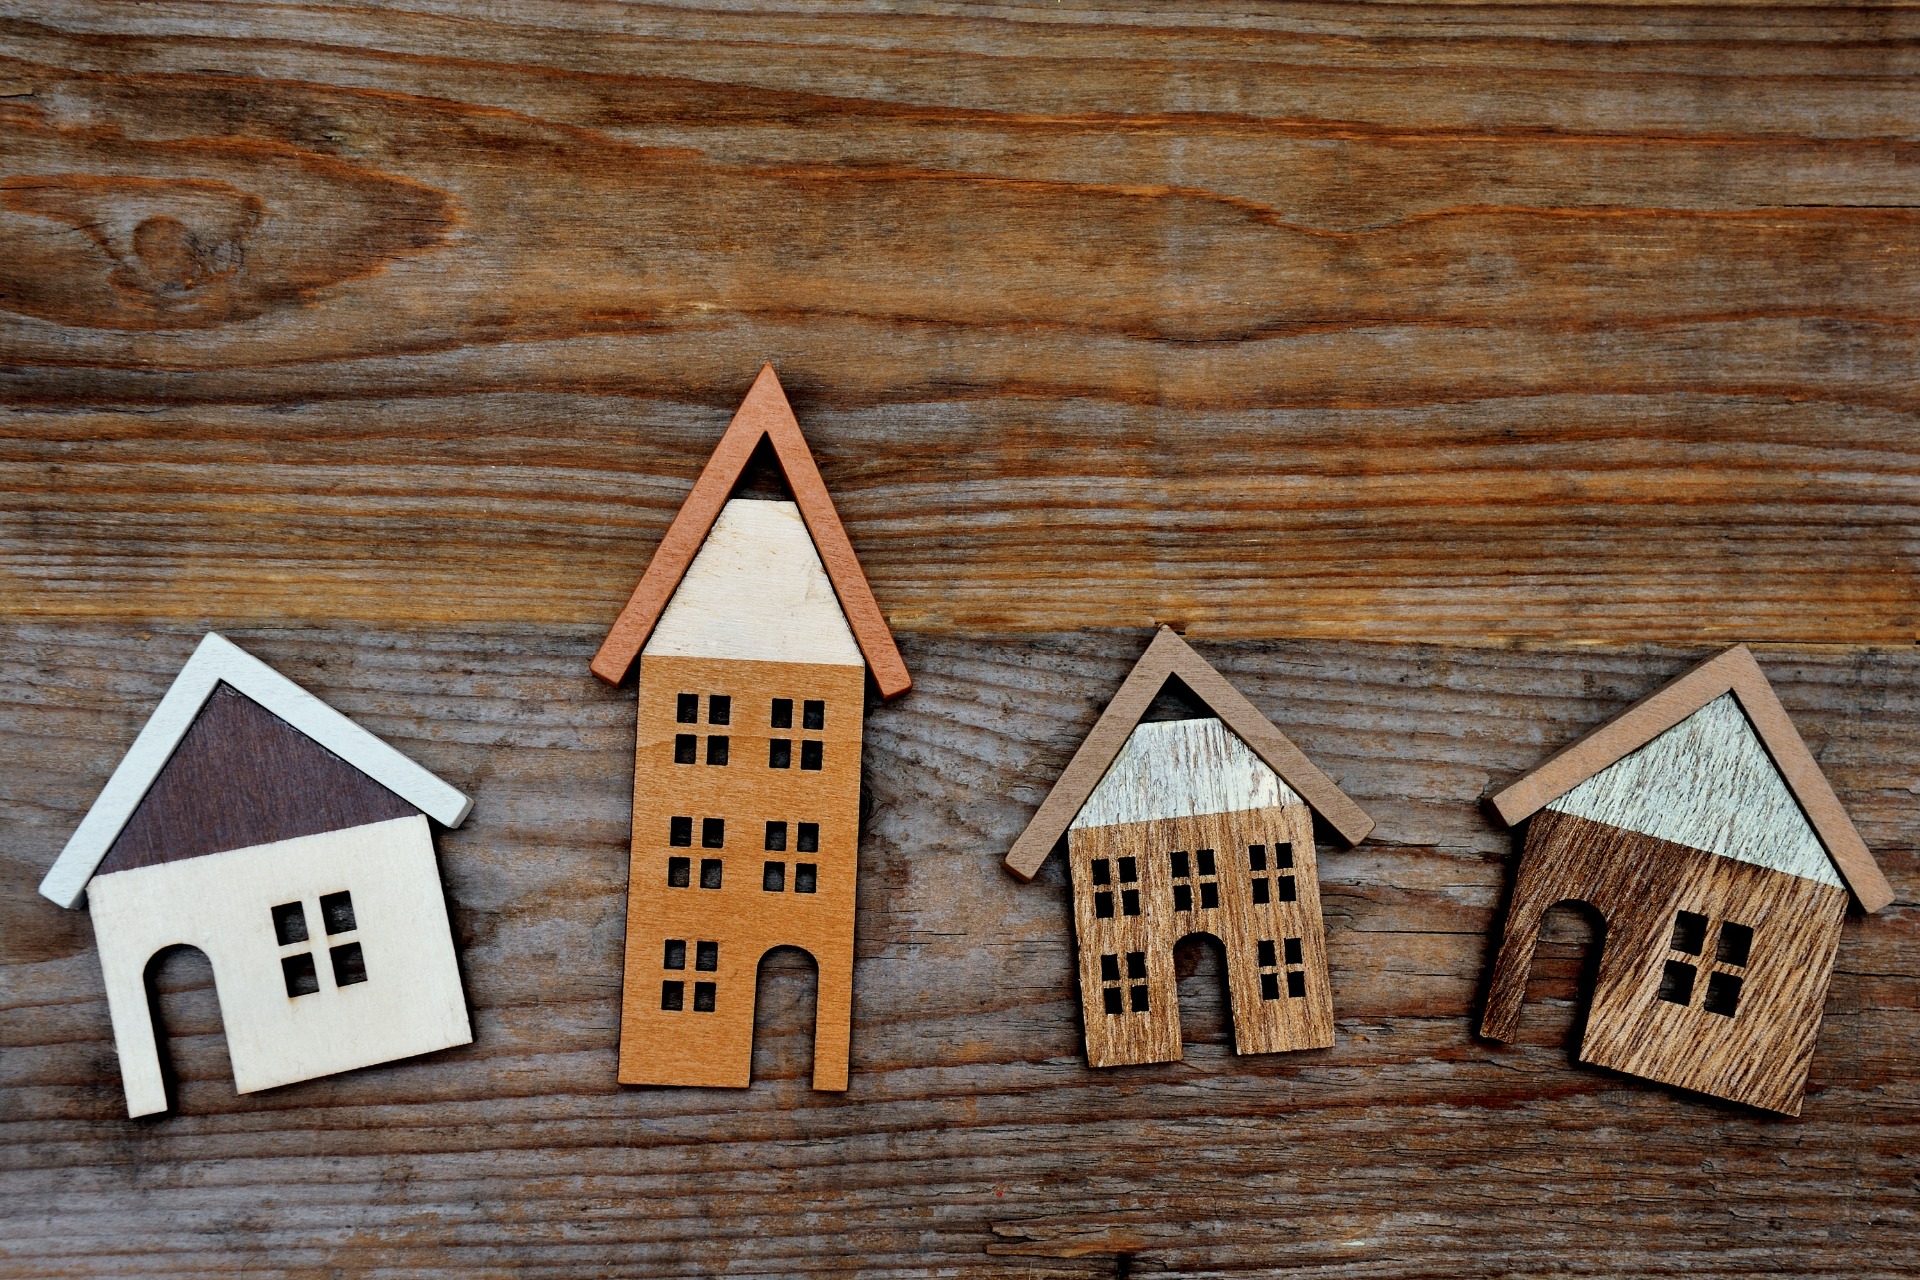 Selection of Wooden Houses on a Wooden Background